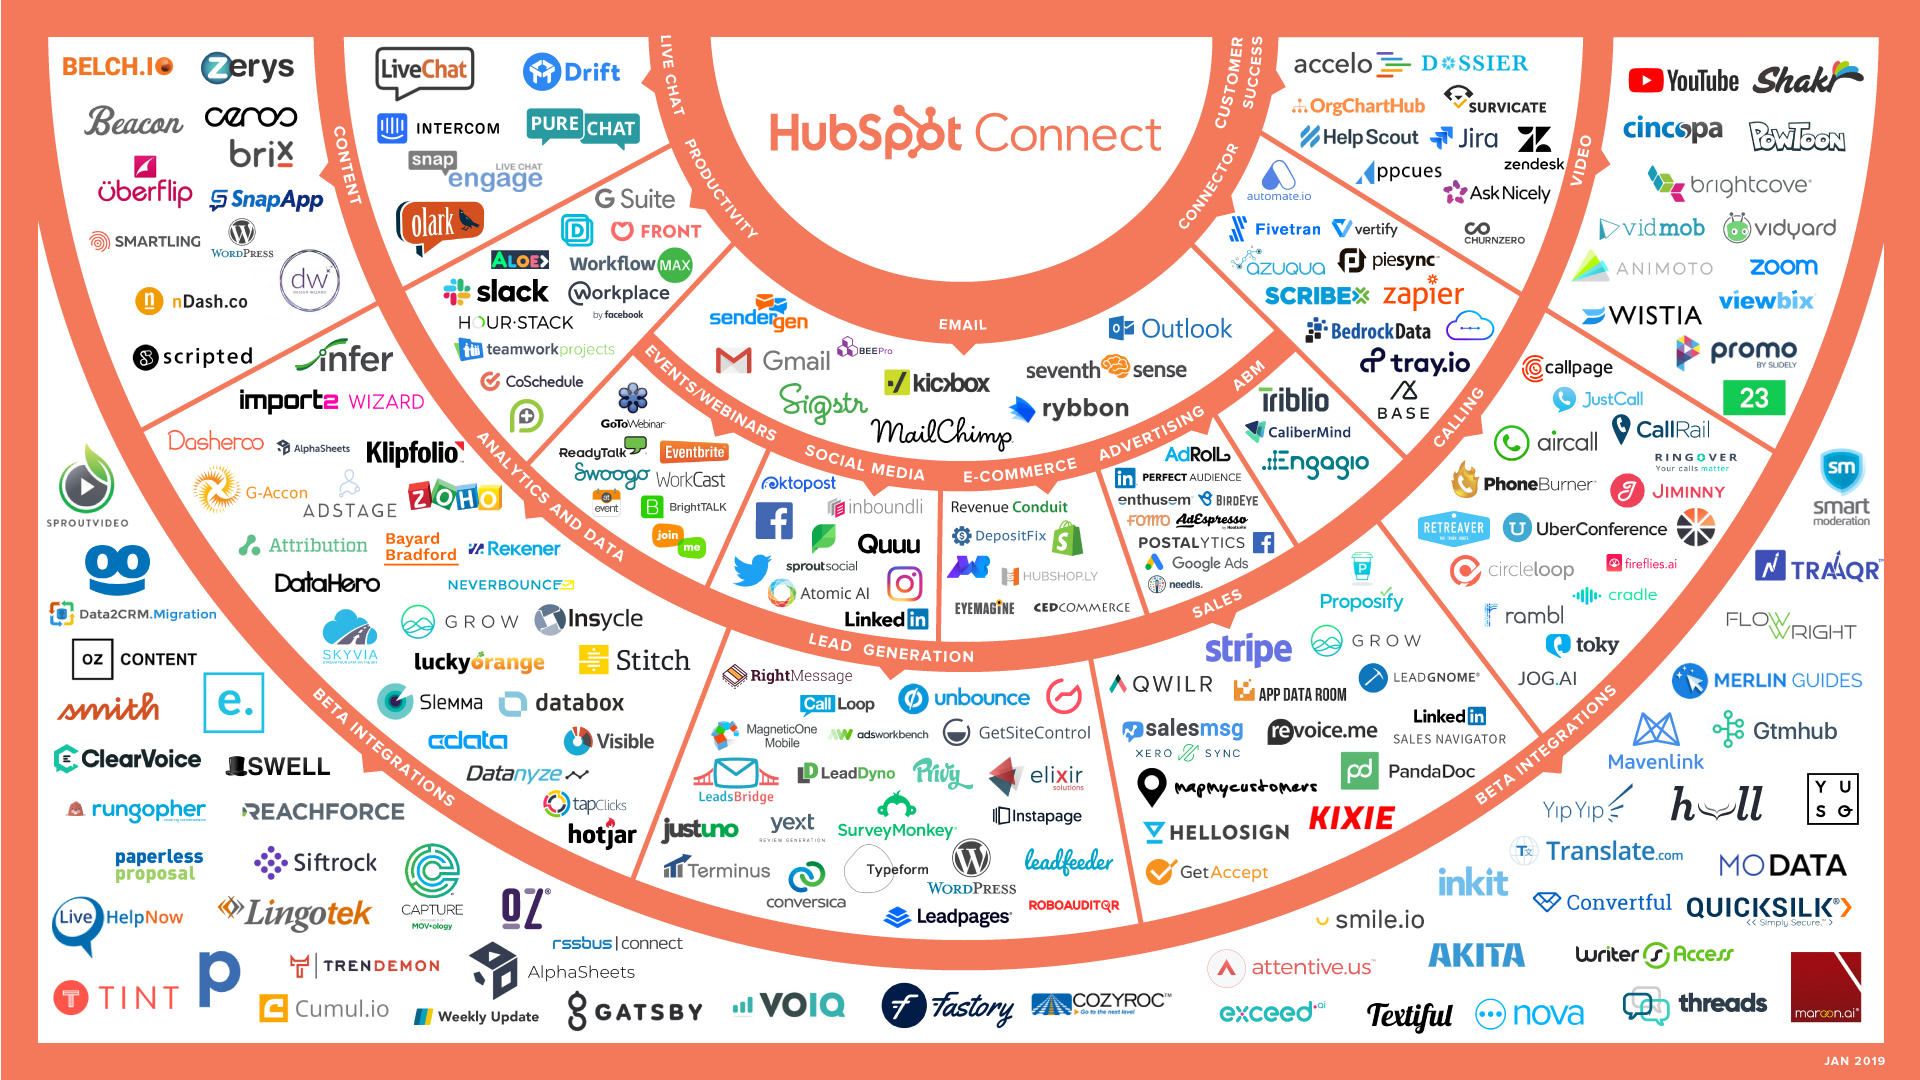 March 2019: New HubSpot Product Integrations This Month